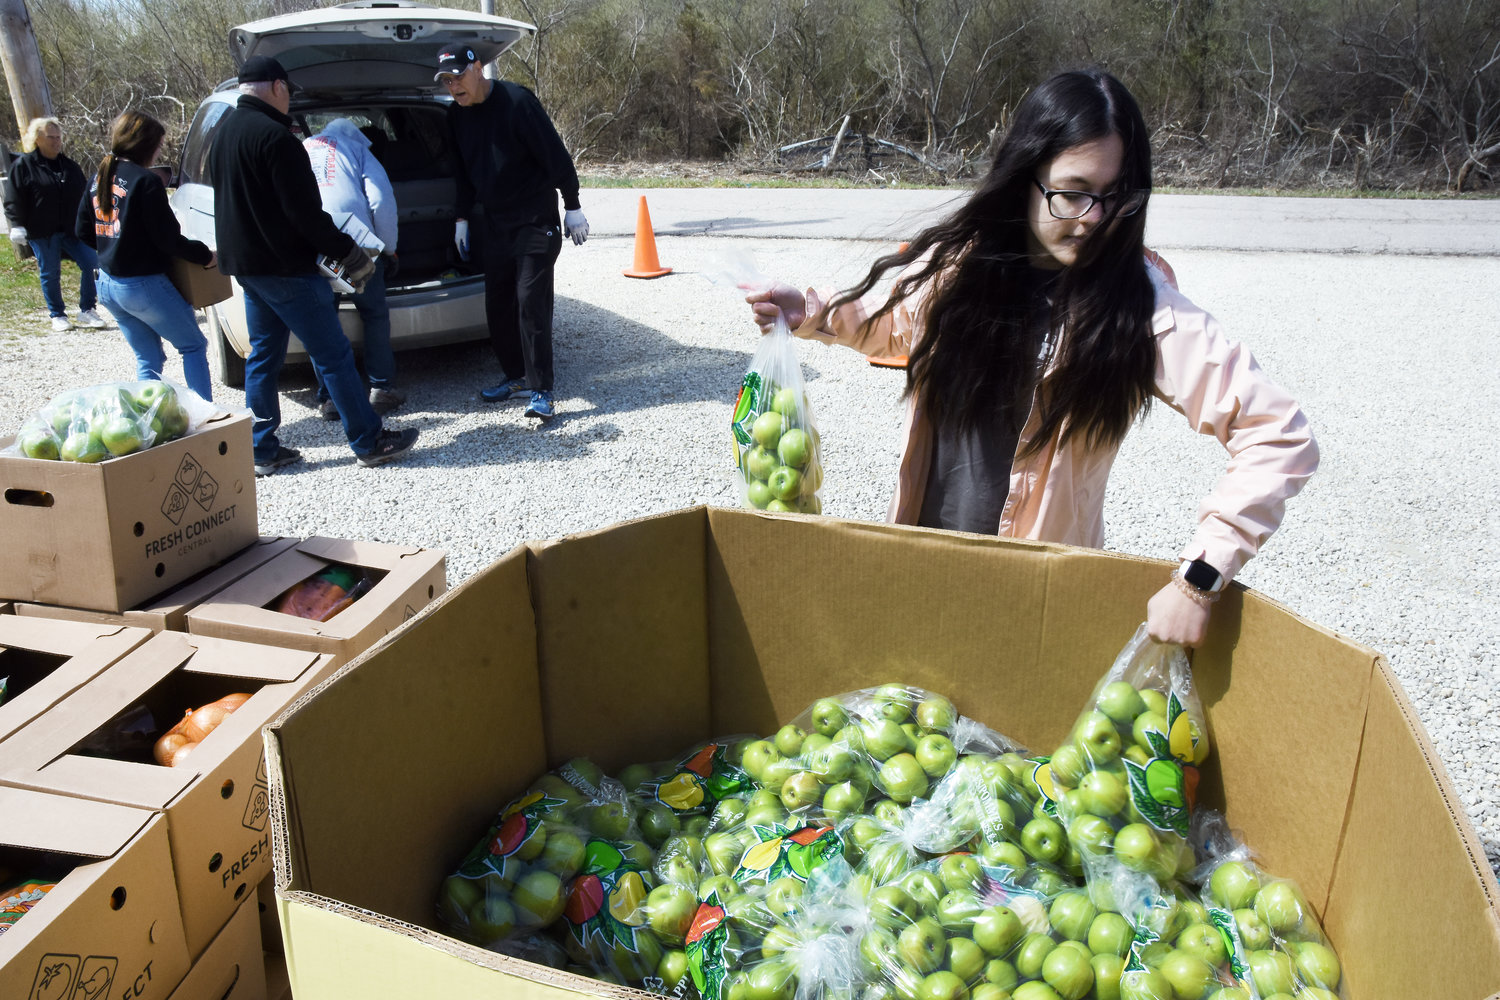 Mercedes Baguio selects a bag of apples to distribute Thursday at the Helping Hands Outreach Center’s Mobile Market.